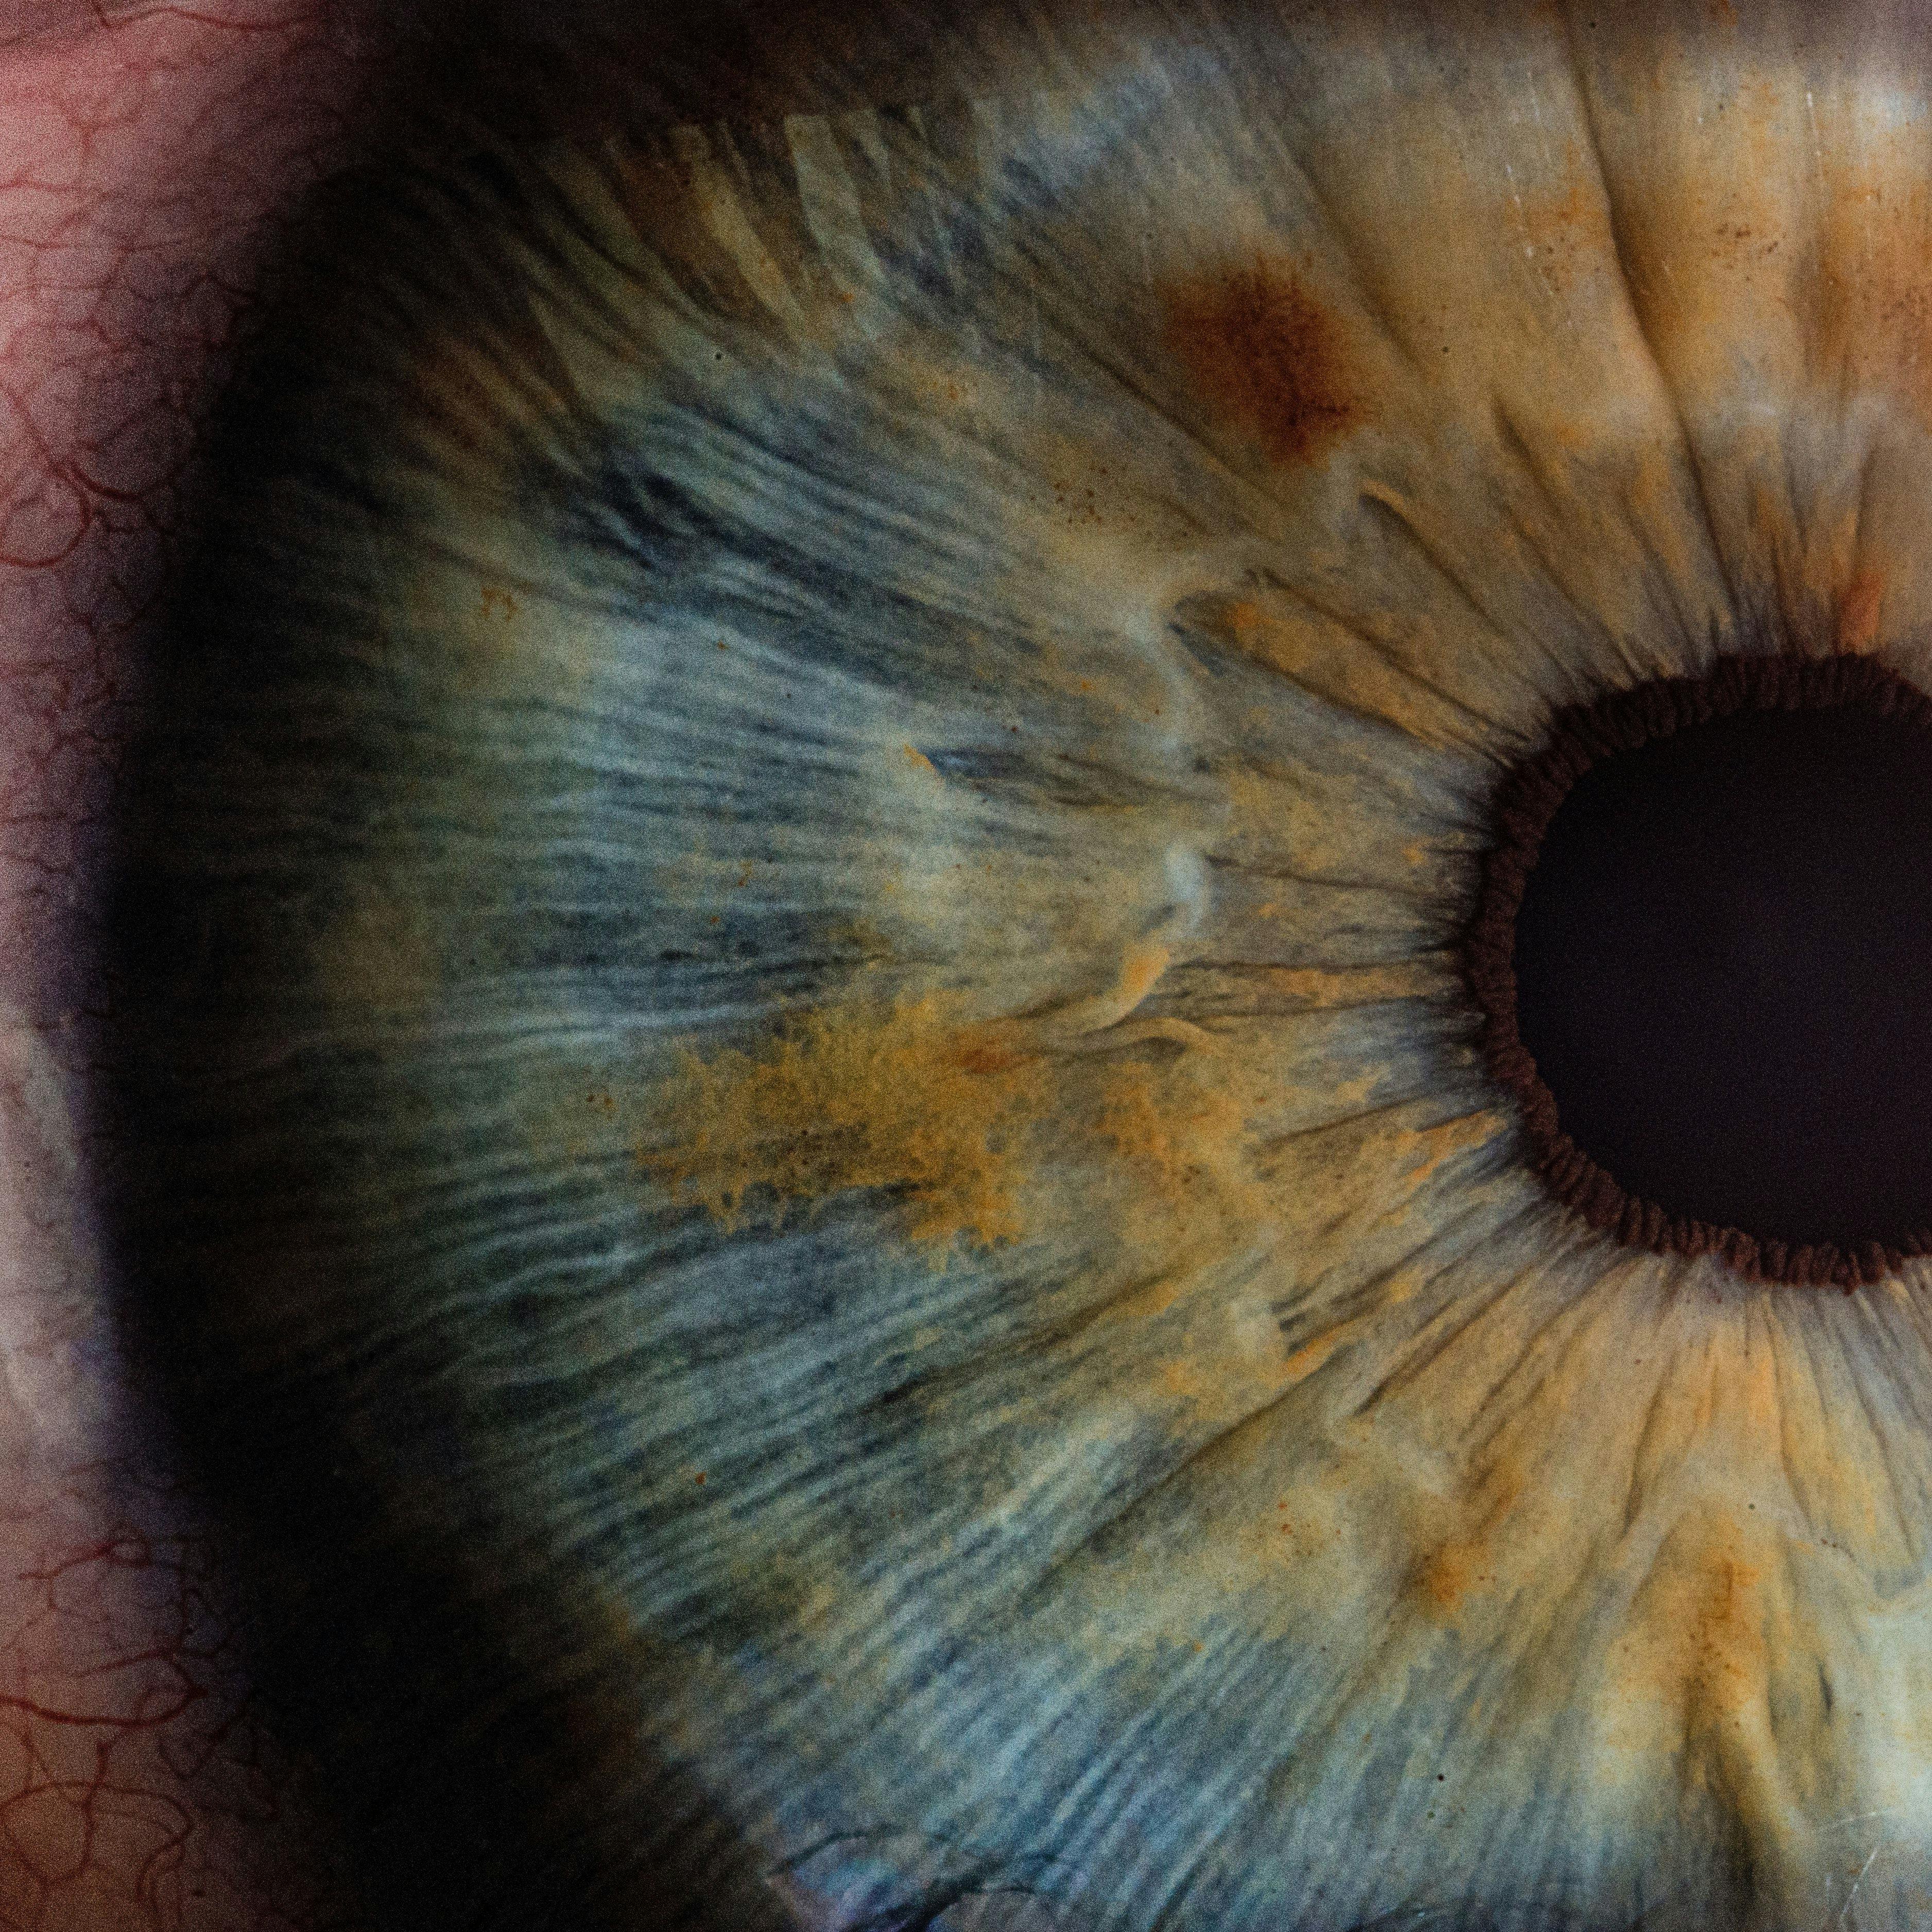 Increased Risk of Dry, Wet AMD Observed Among Patients with Type 2 Diabetes 